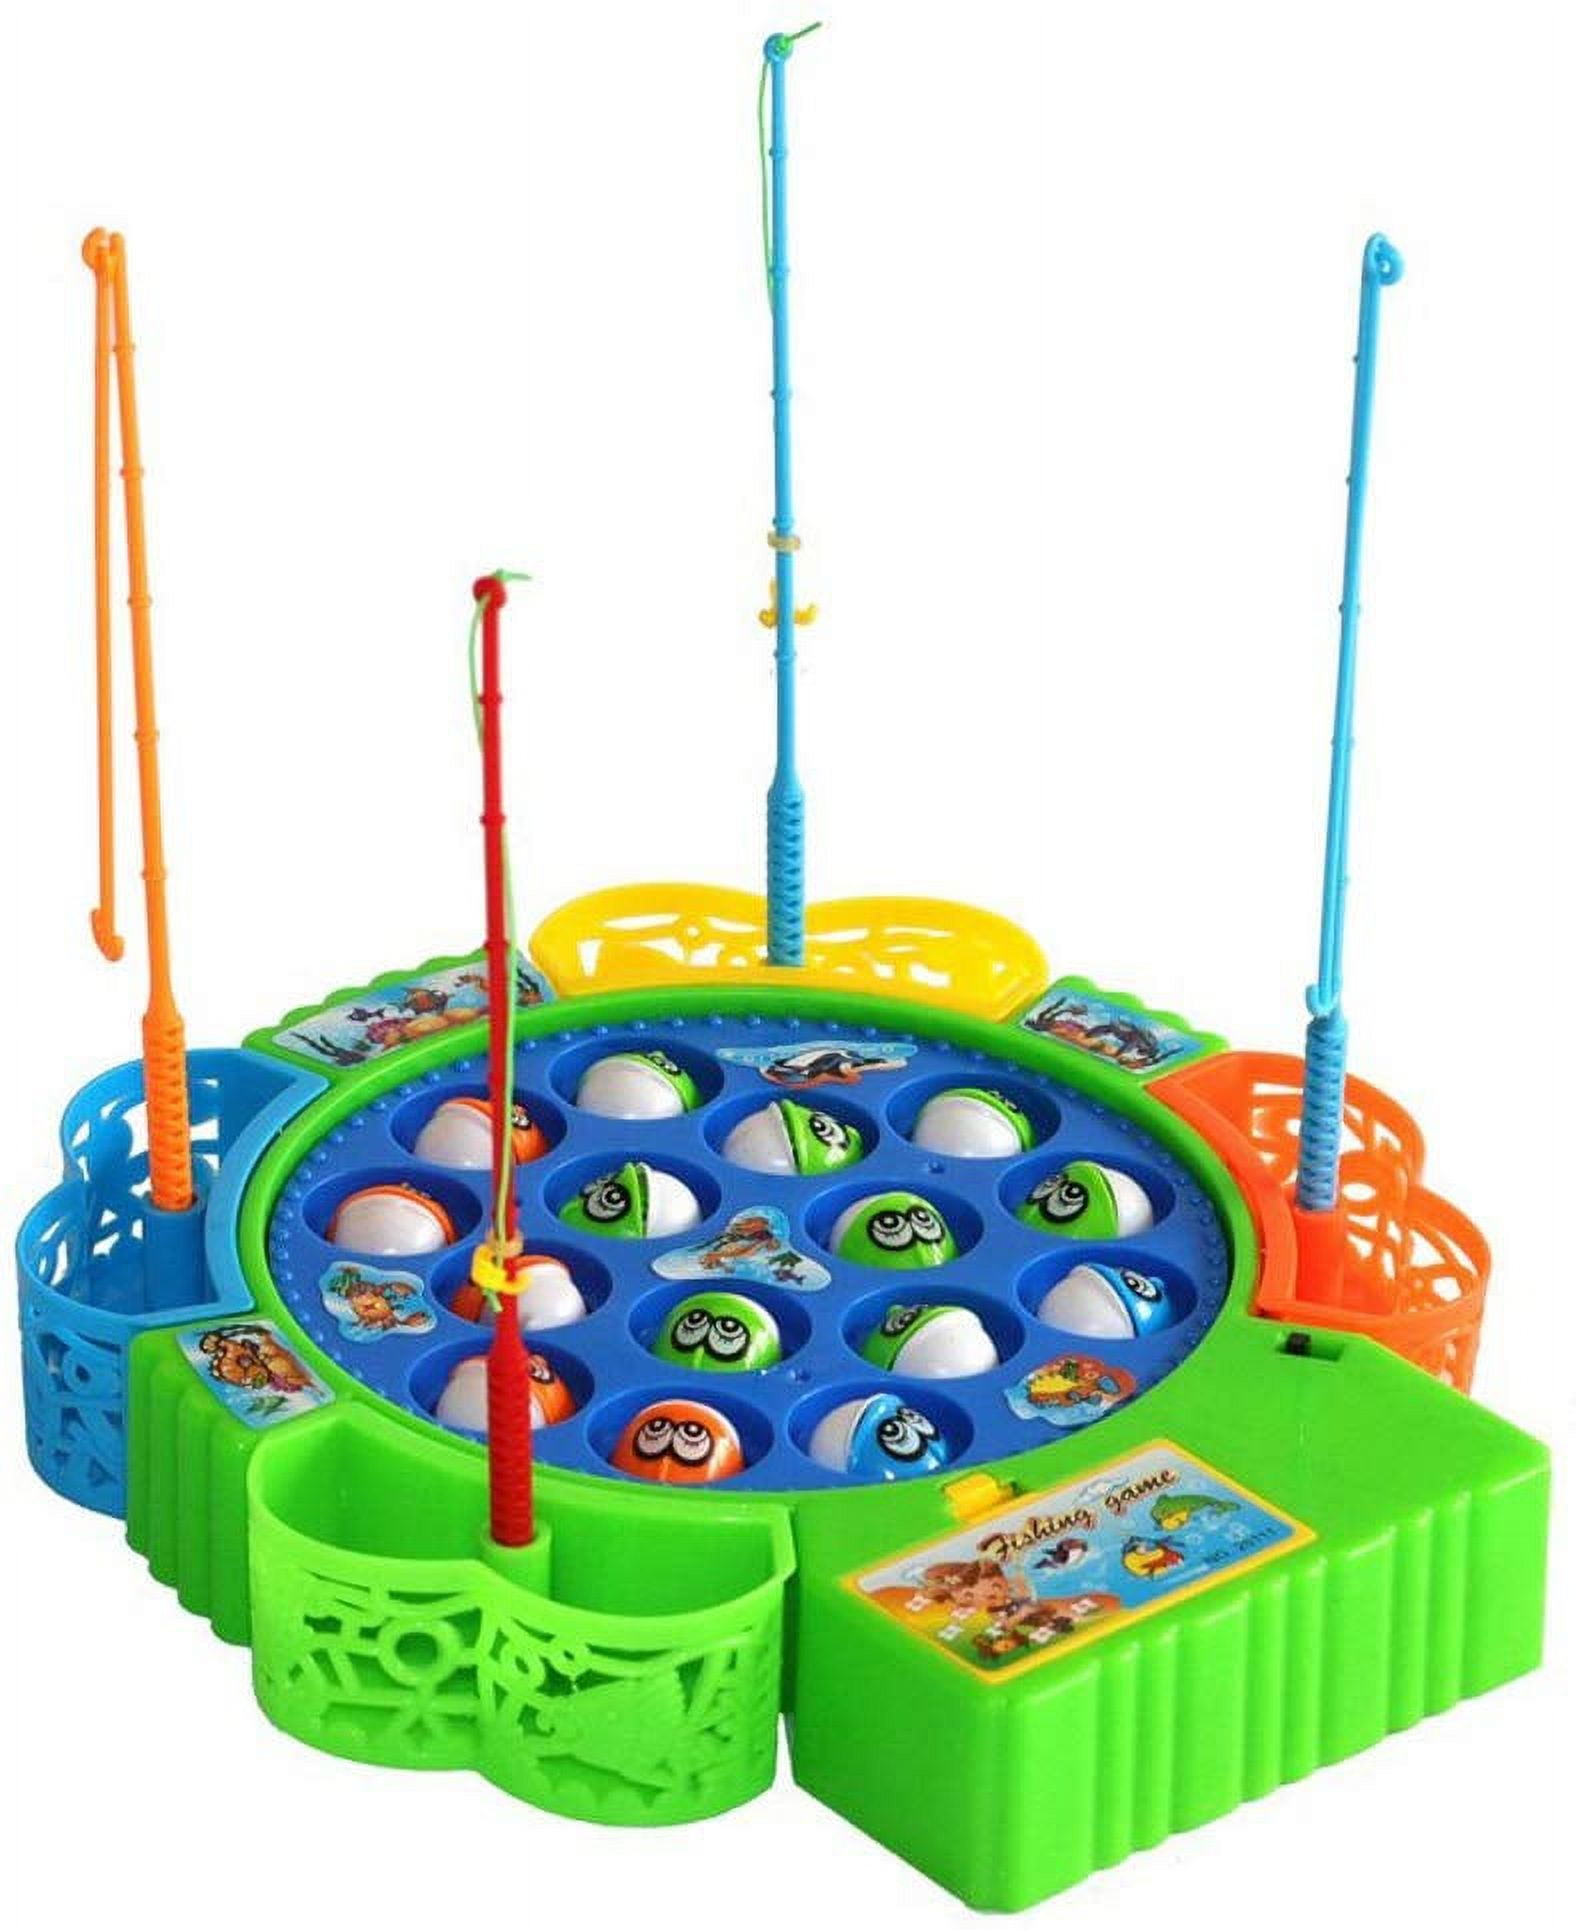 Fishing Game Toy Set with Rotating Board, 15 Fish UK